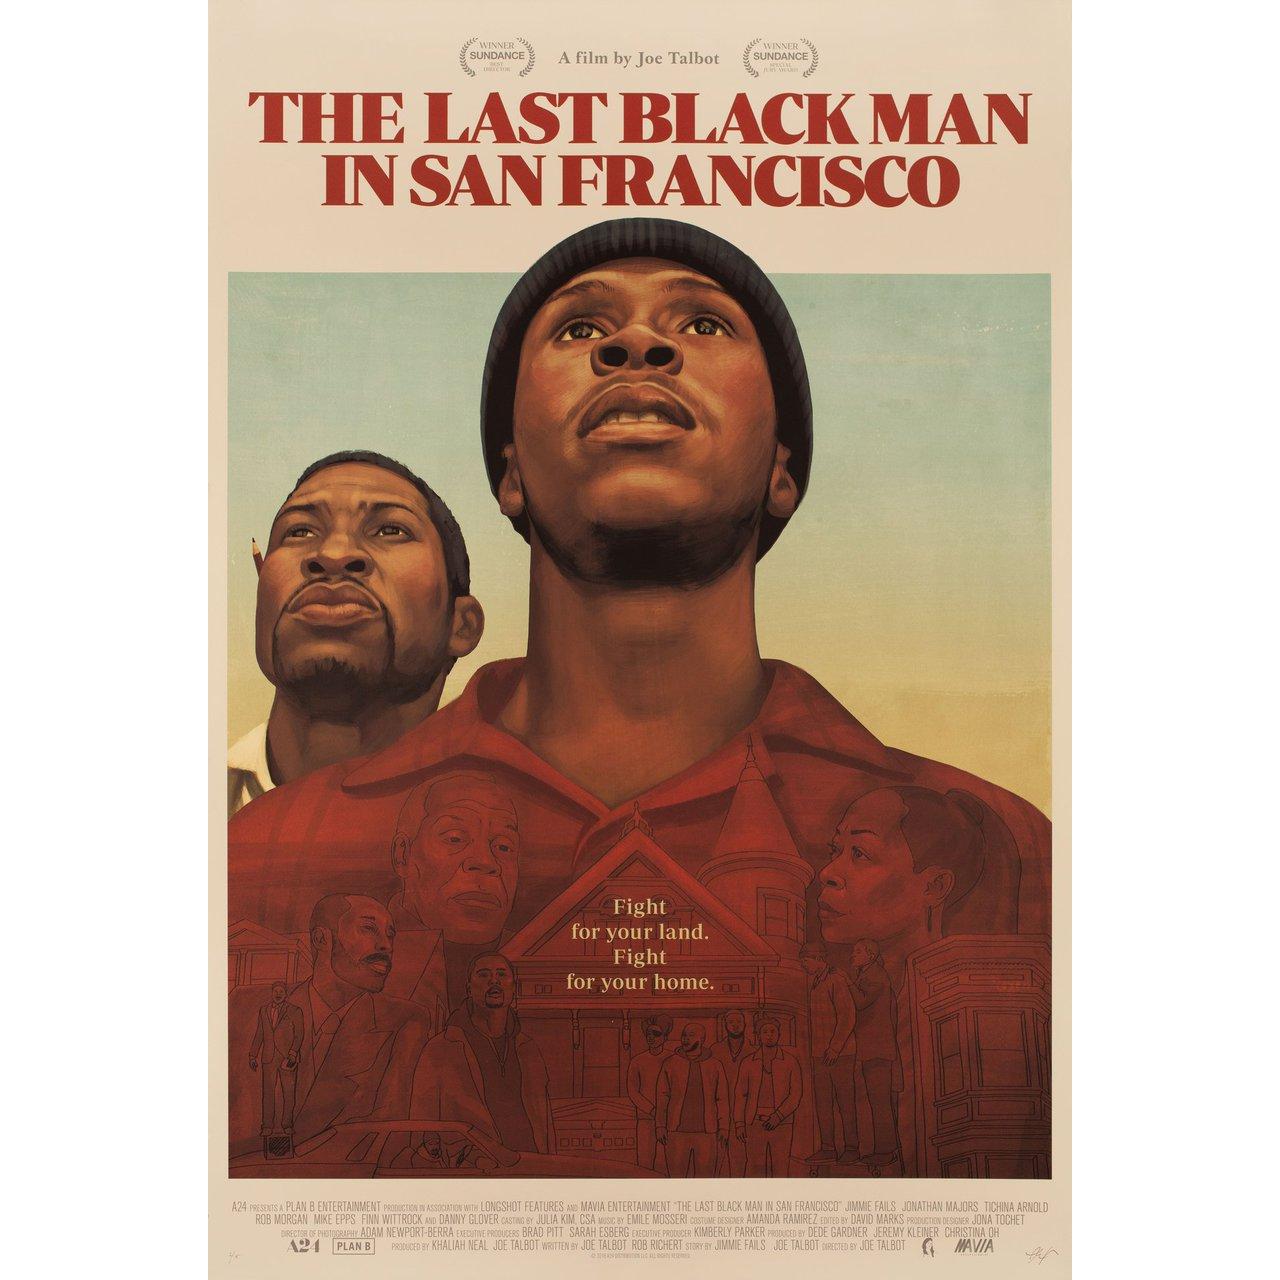 Original 2022 U.S. one sheet poster by Akiko Stehrenberger for the 2019 film The Last Black Man in San Francisco directed by Joe Talbot with Jimmie Fails / Jonathan Majors / Rob Morgan / Tichina Arnold. Signed by Akiko Stehrenberger. Fine condition,